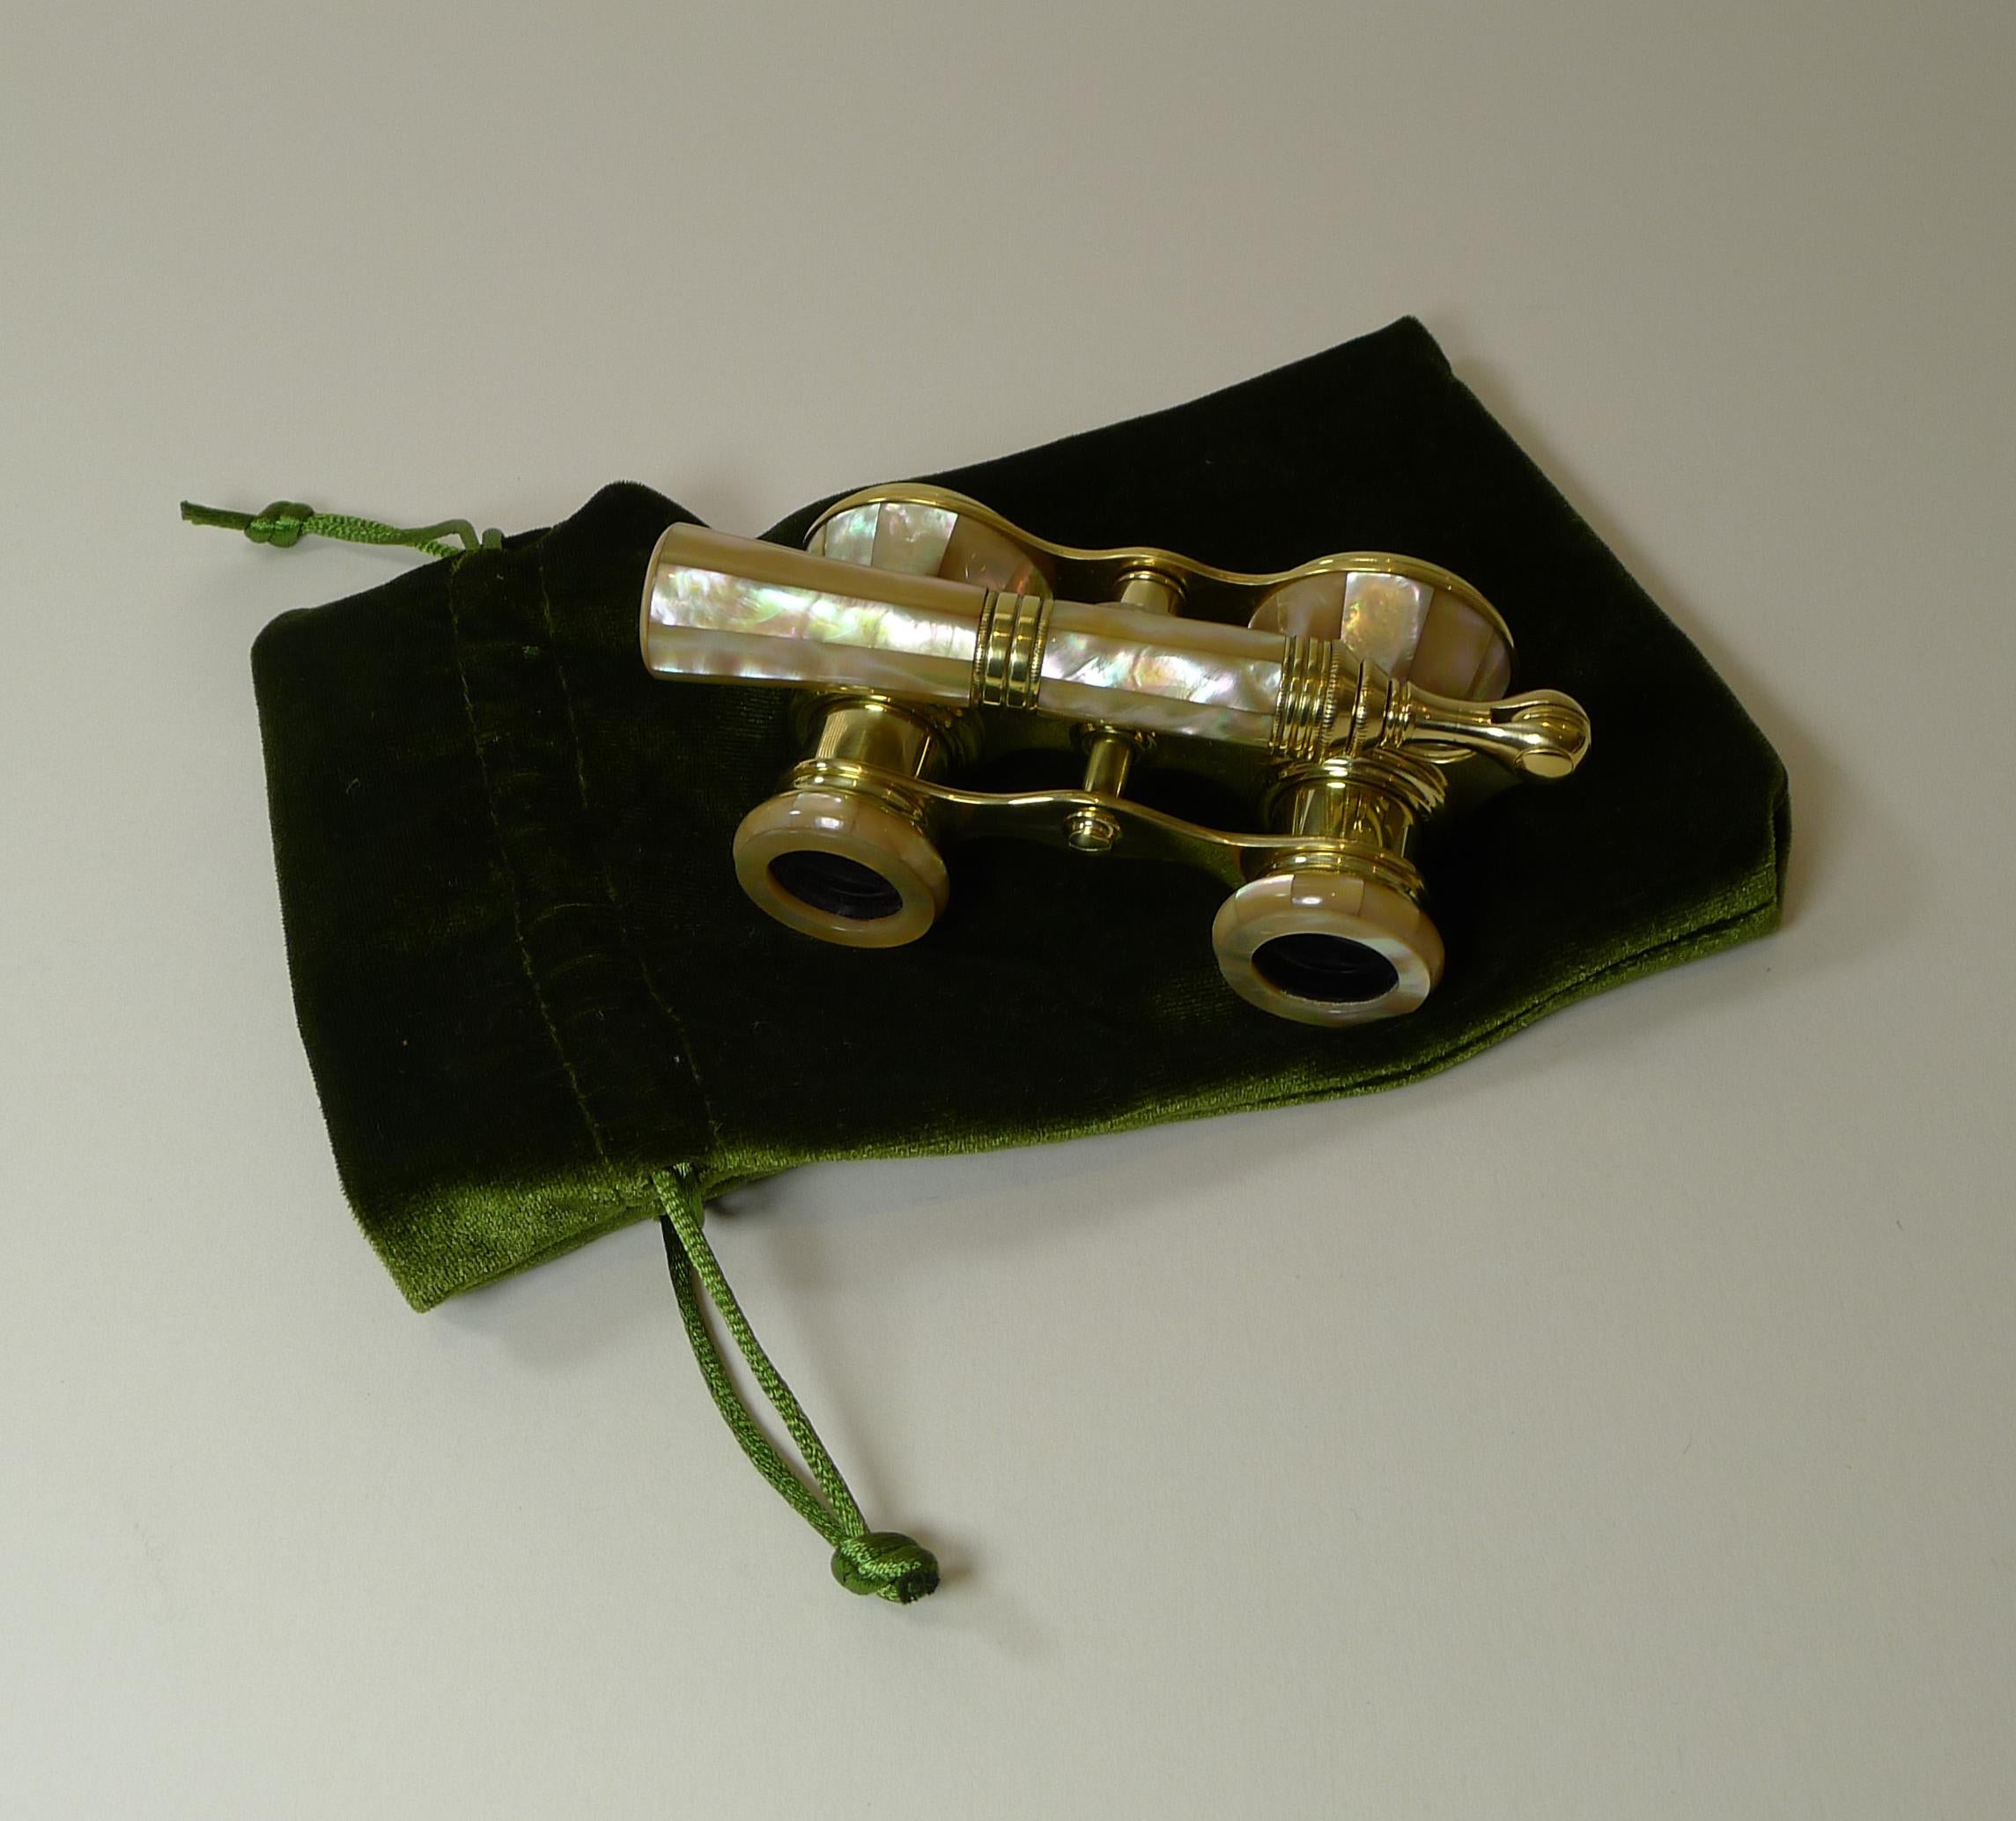 A very fine pair of antique French opera glasses dating to c.1910 signed by the well renowned manufacturer, Colmont of Paris.

Clad in iridescent Mother of Pearl or Nacre shell. This pair is lucky enough to have a two-drawer lorgnette handle,